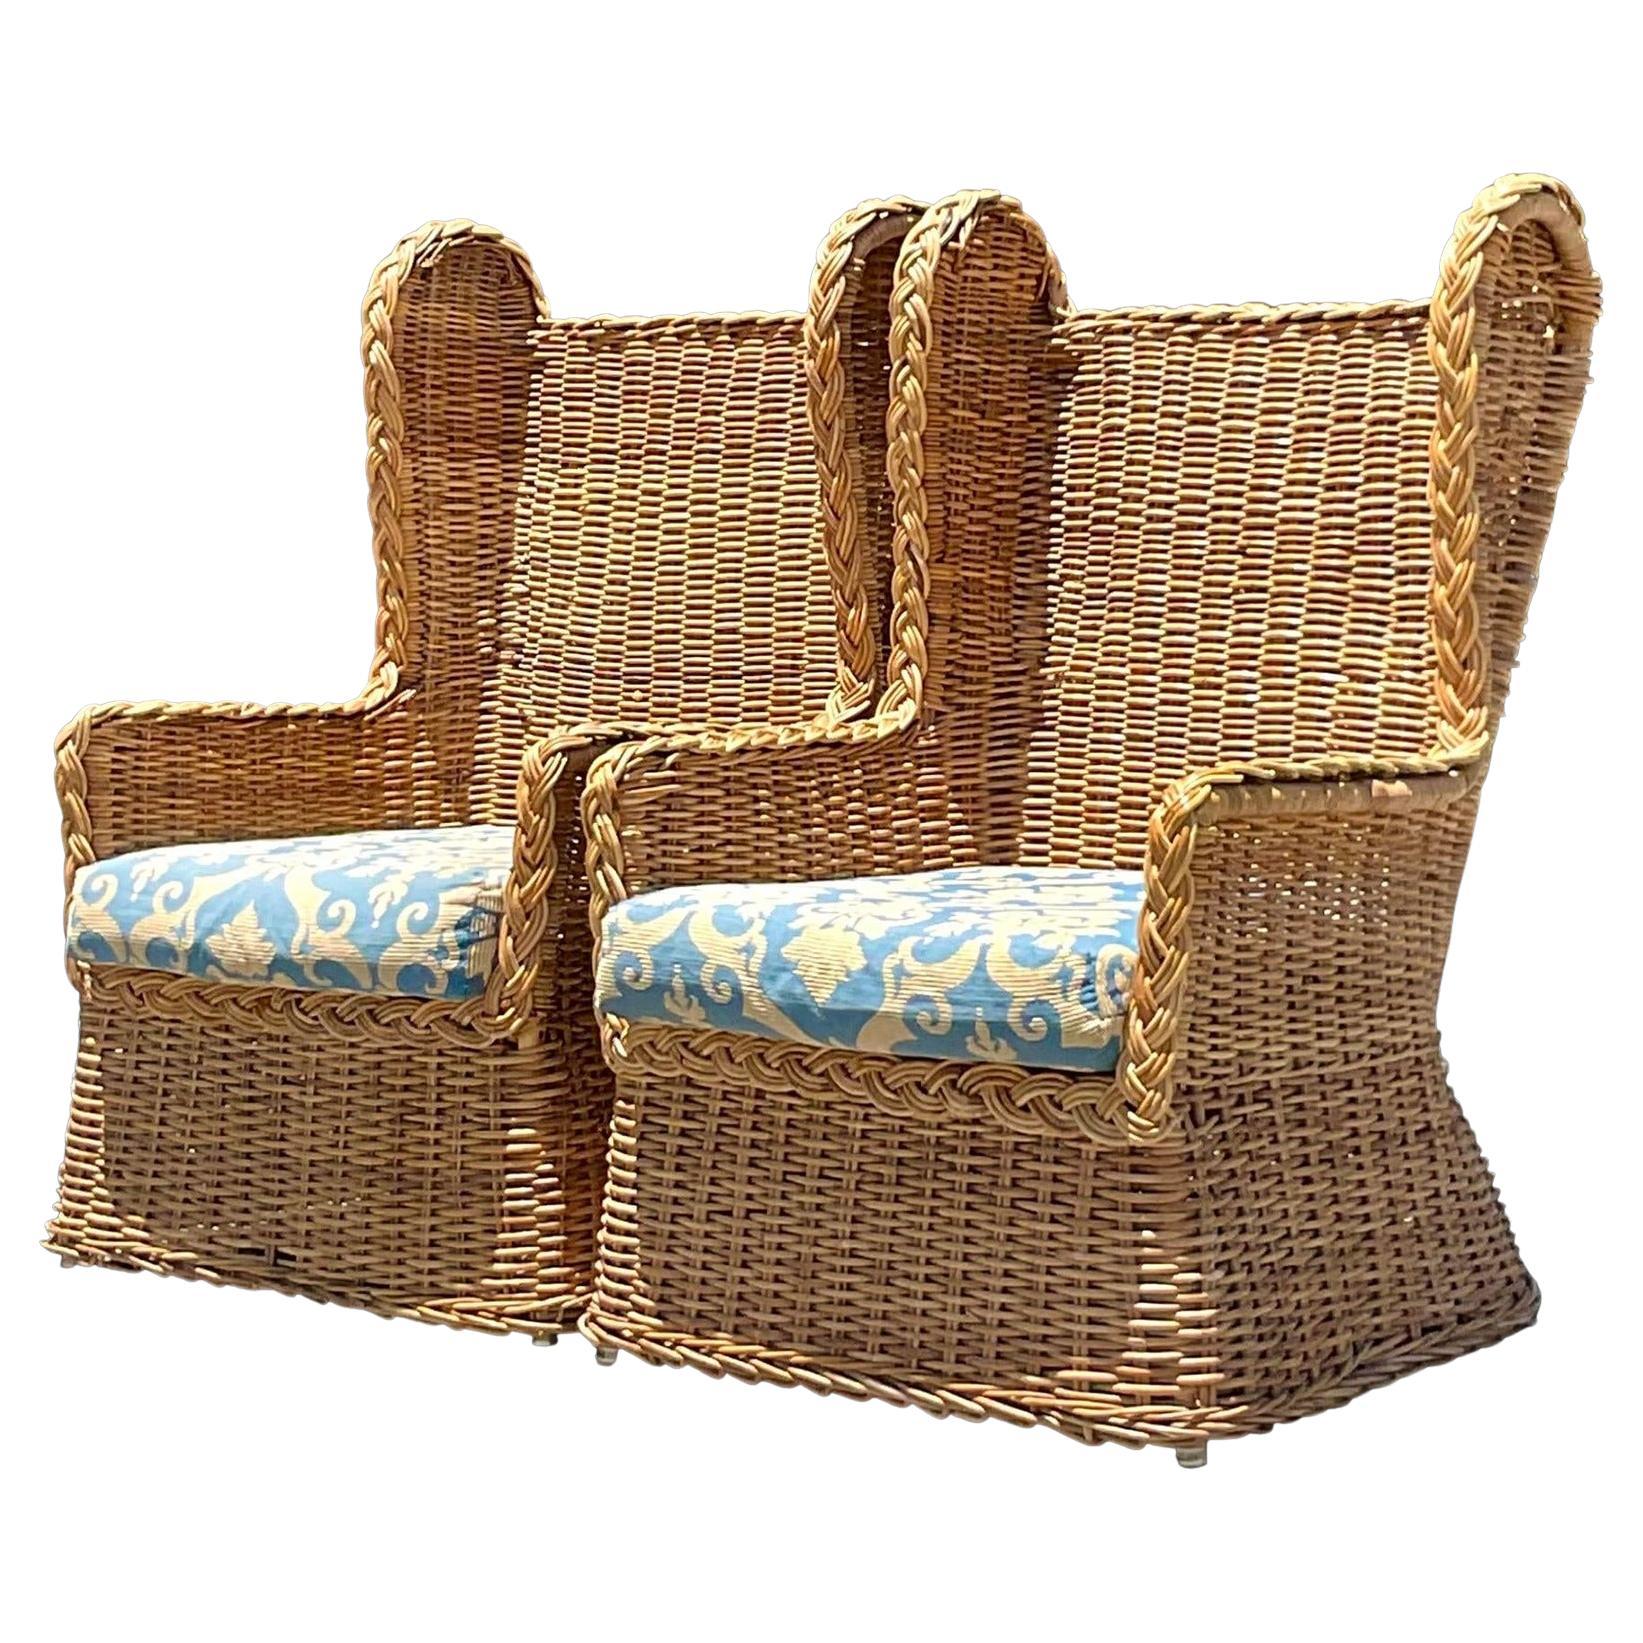 Vintage Coastal Woven Rattan Wingback Chairs - a Pair